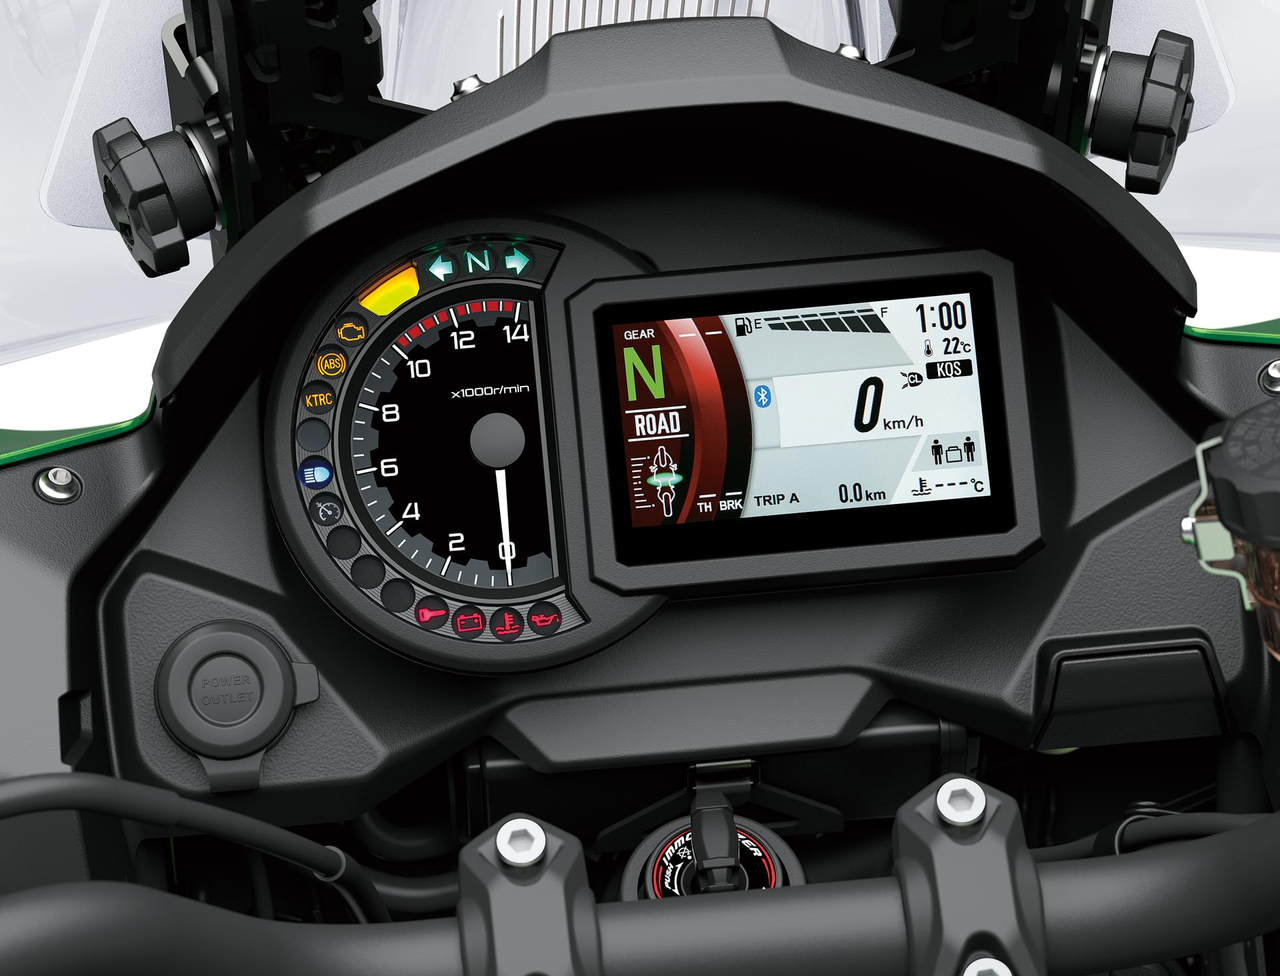 Integrated Riding Modes